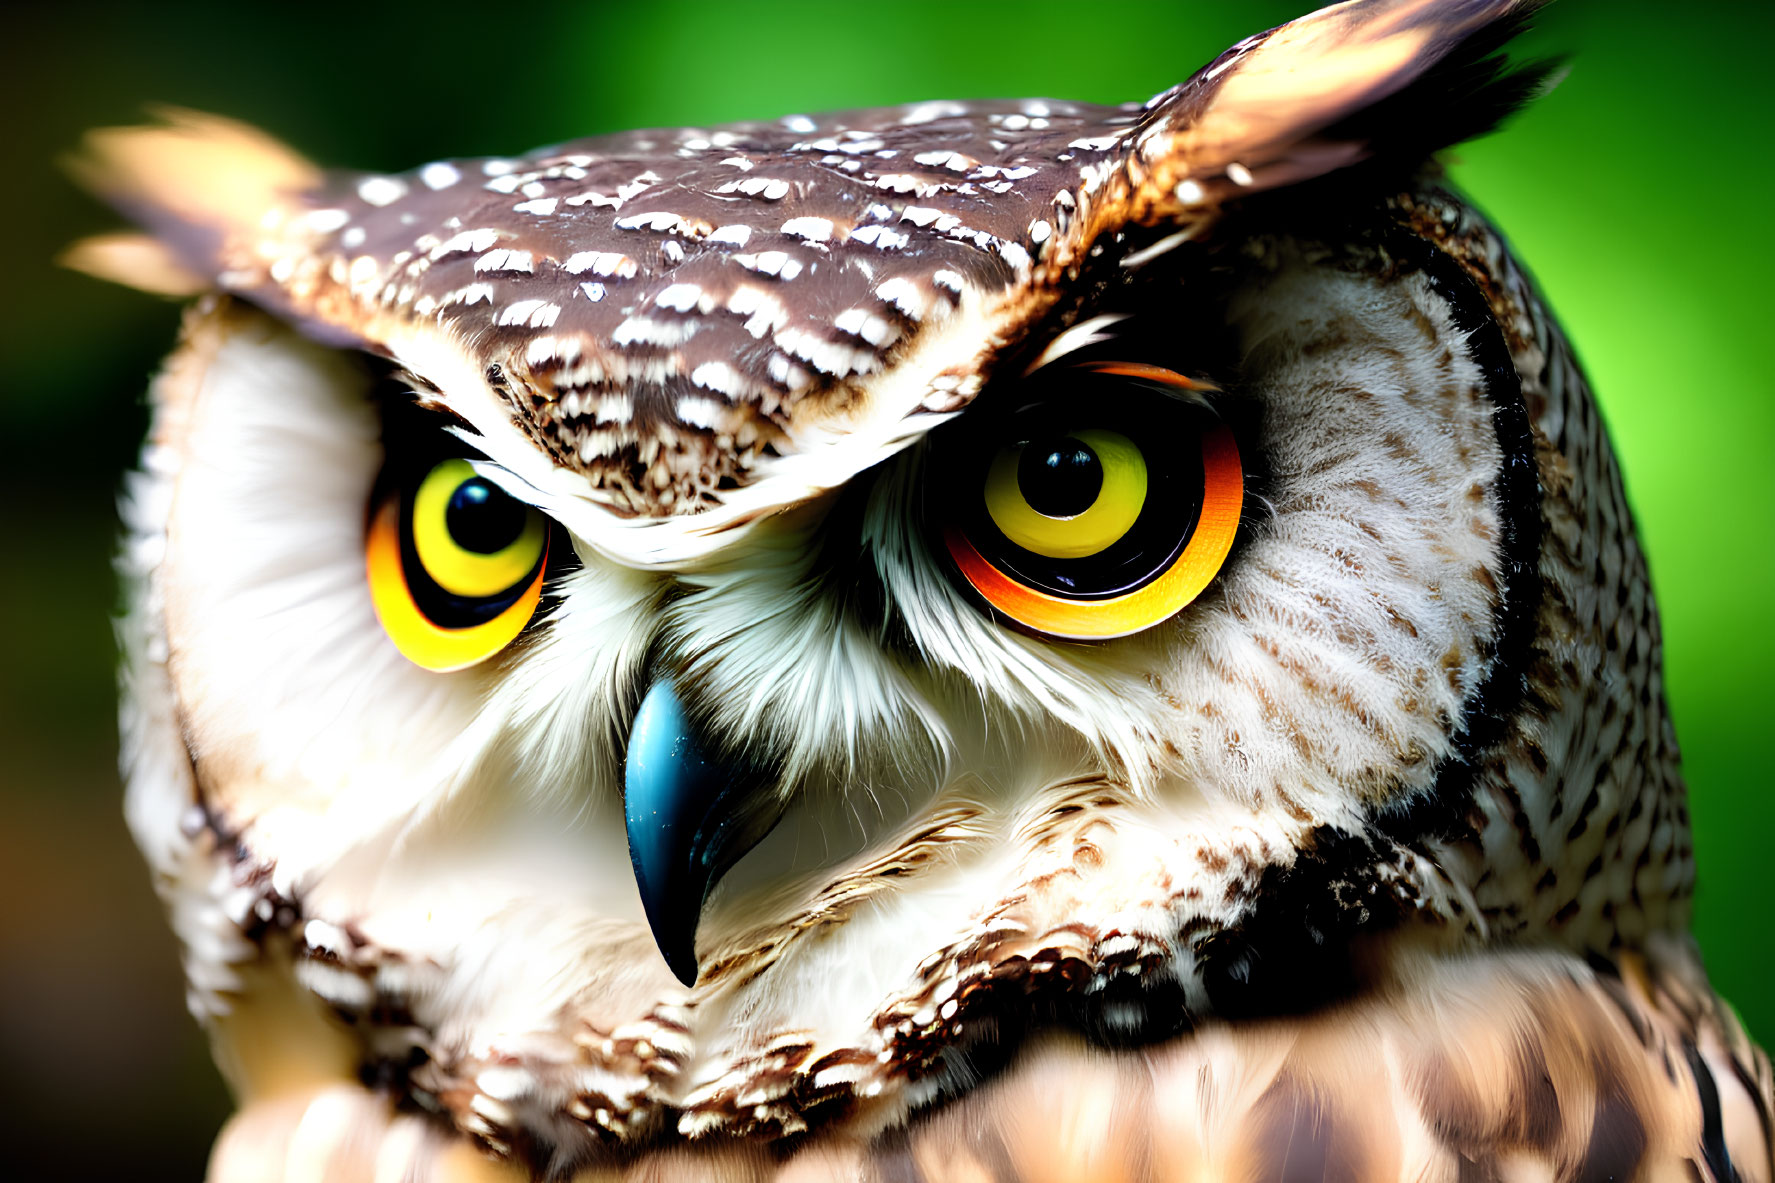 Detailed close-up of owl's intense yellow eyes, sharp beak, and intricate feathers.